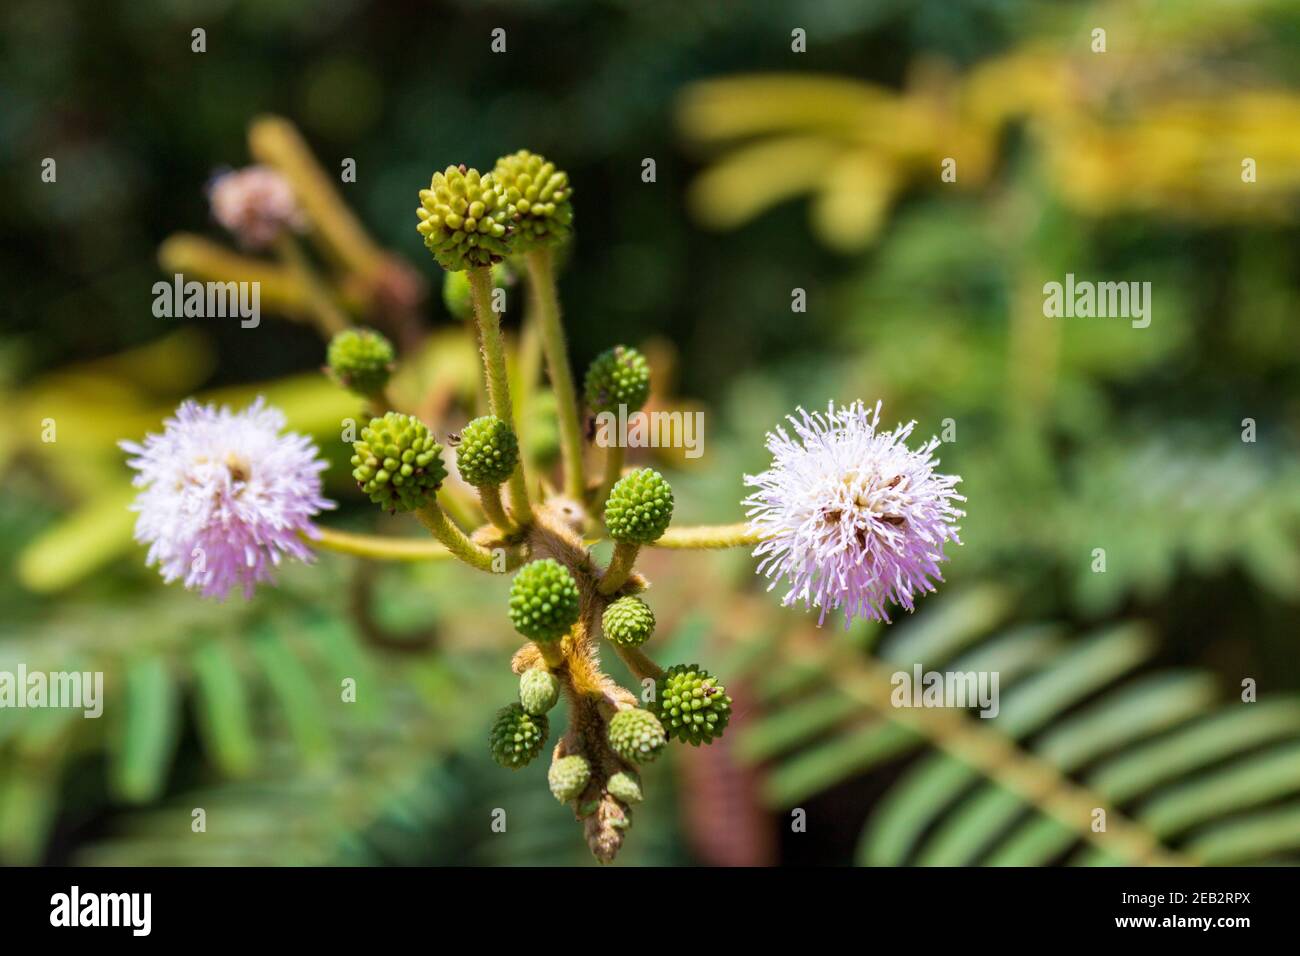 A touch me not plant in bloom. Also known as shame-plant or sensitive plant Mimosa pudica has a fascinating reaction when touched, the leaves droop. Stock Photo